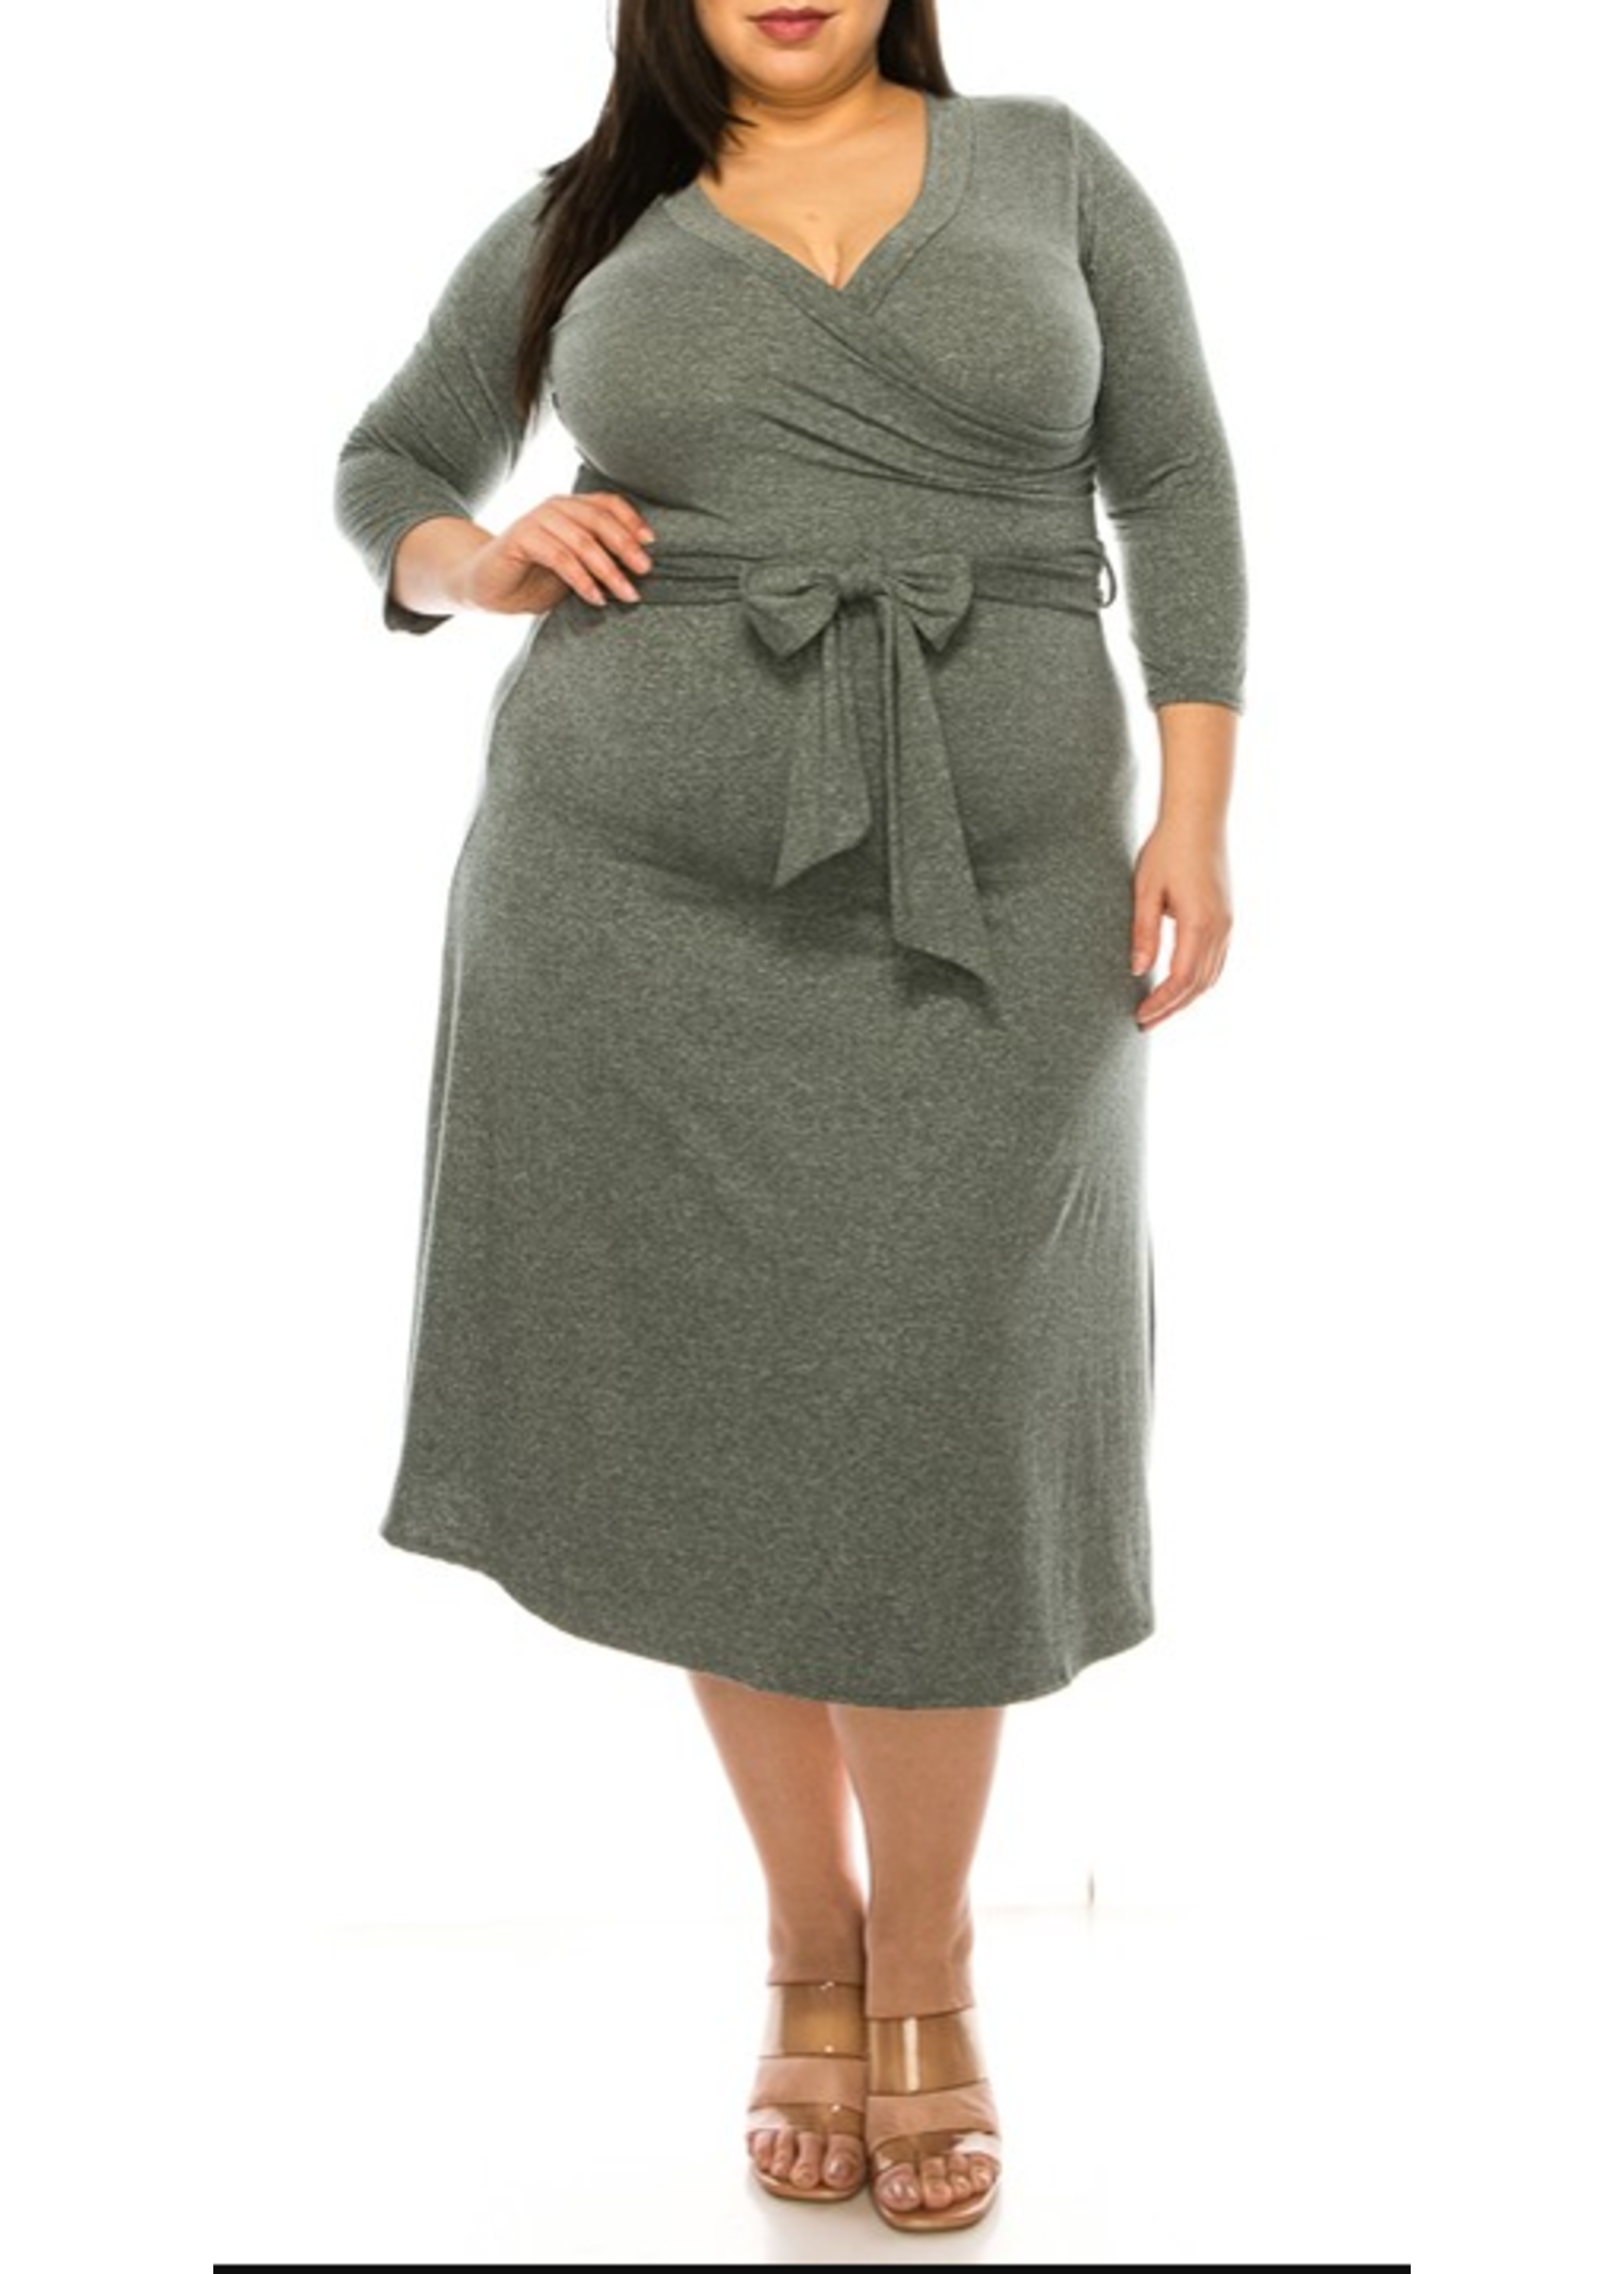 NMNWMD844 - Plus size, solid faux wrap dress with deep V-neck